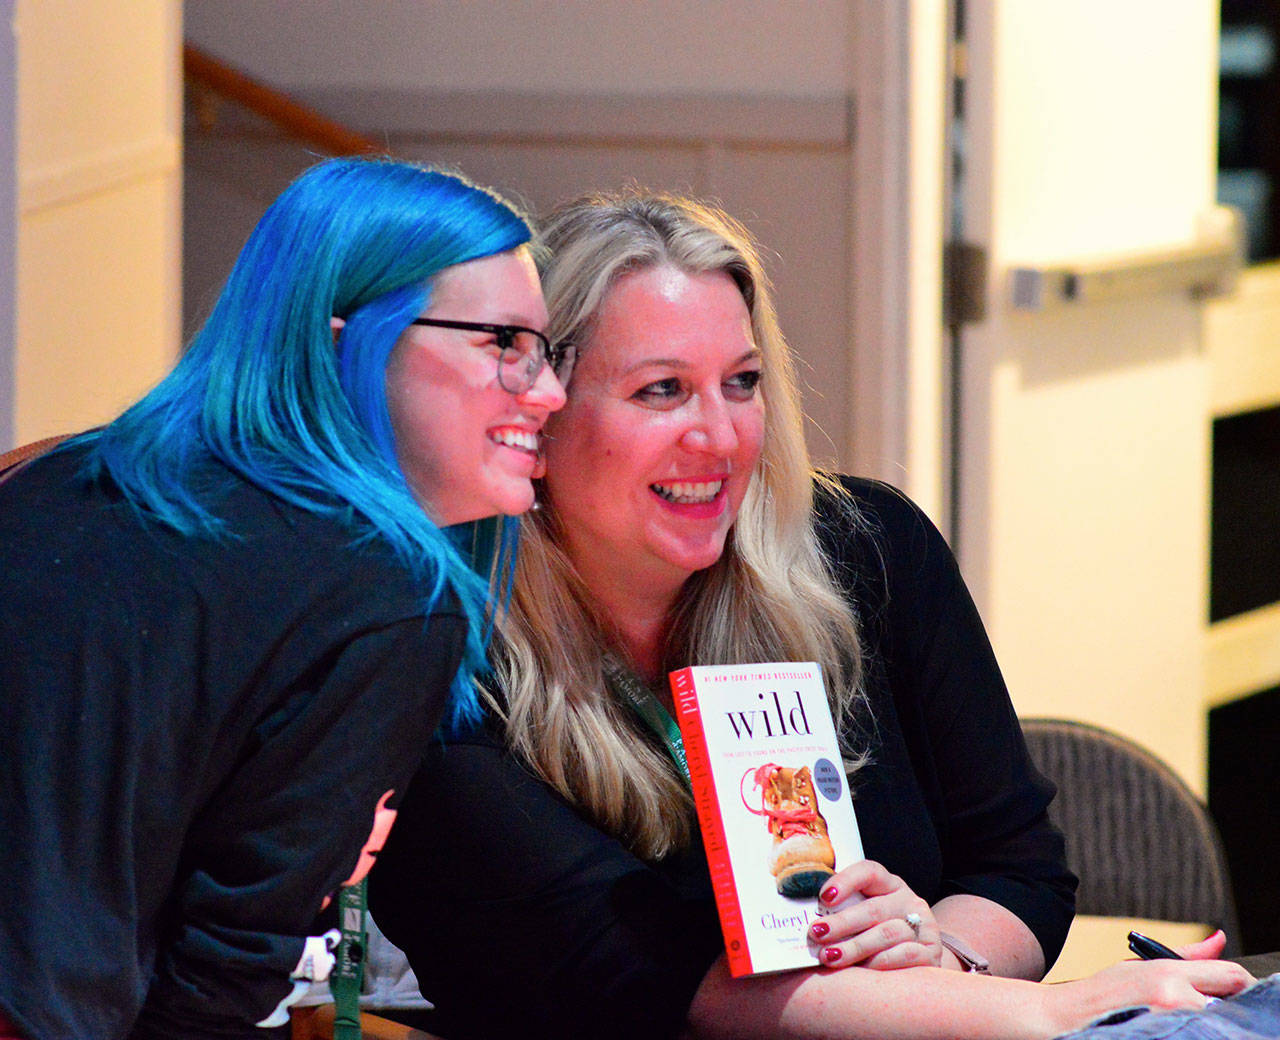 Author Cheryl Strayed signed a fresh copy of her memoir “Wild” for Kym Headley of Port Townsend on Saturday night. Strayed led a discussion of movies, writing and women’s self-determination during the Port Townsend Film Festival throughout the weekend. (Diane Urbani de la Paz/for Peninsula Daily News)